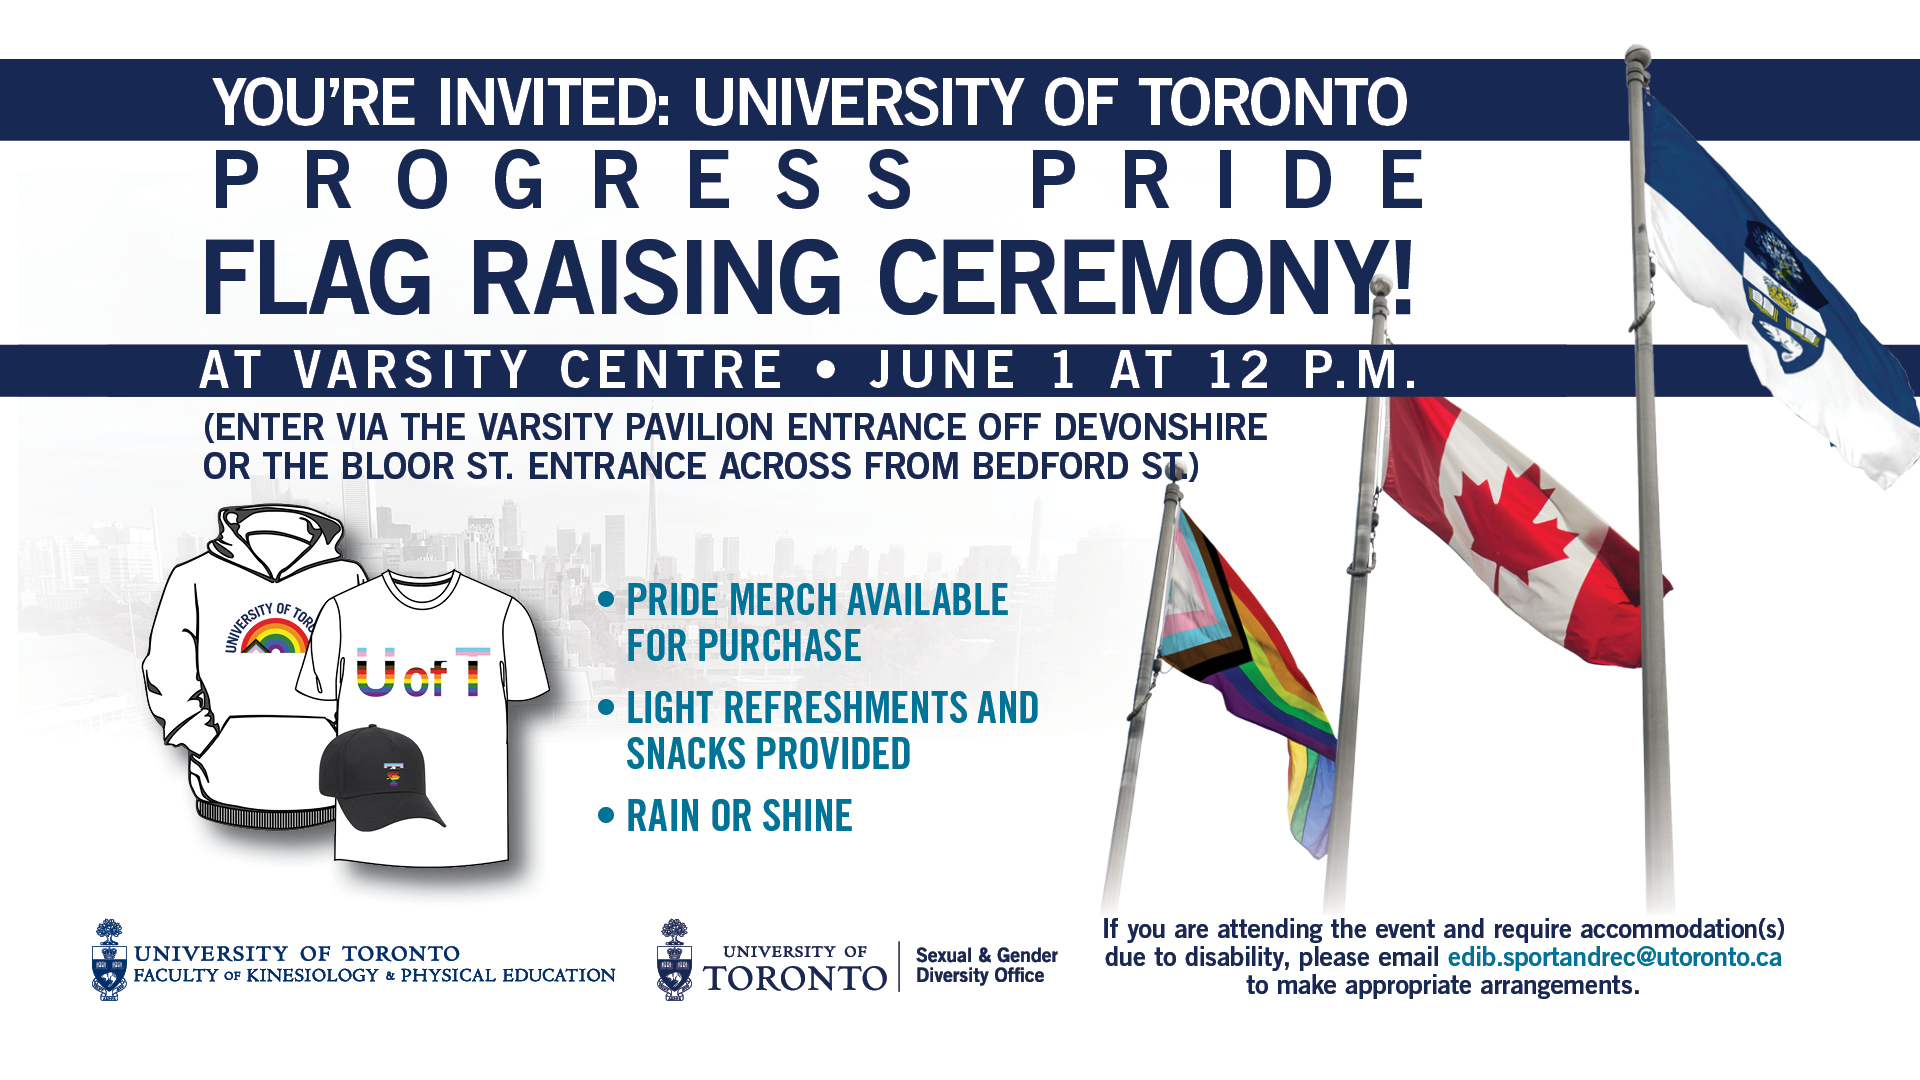 promotional ad with progress pride and u of t flags to celebrate upcoming flag raising event on June 1